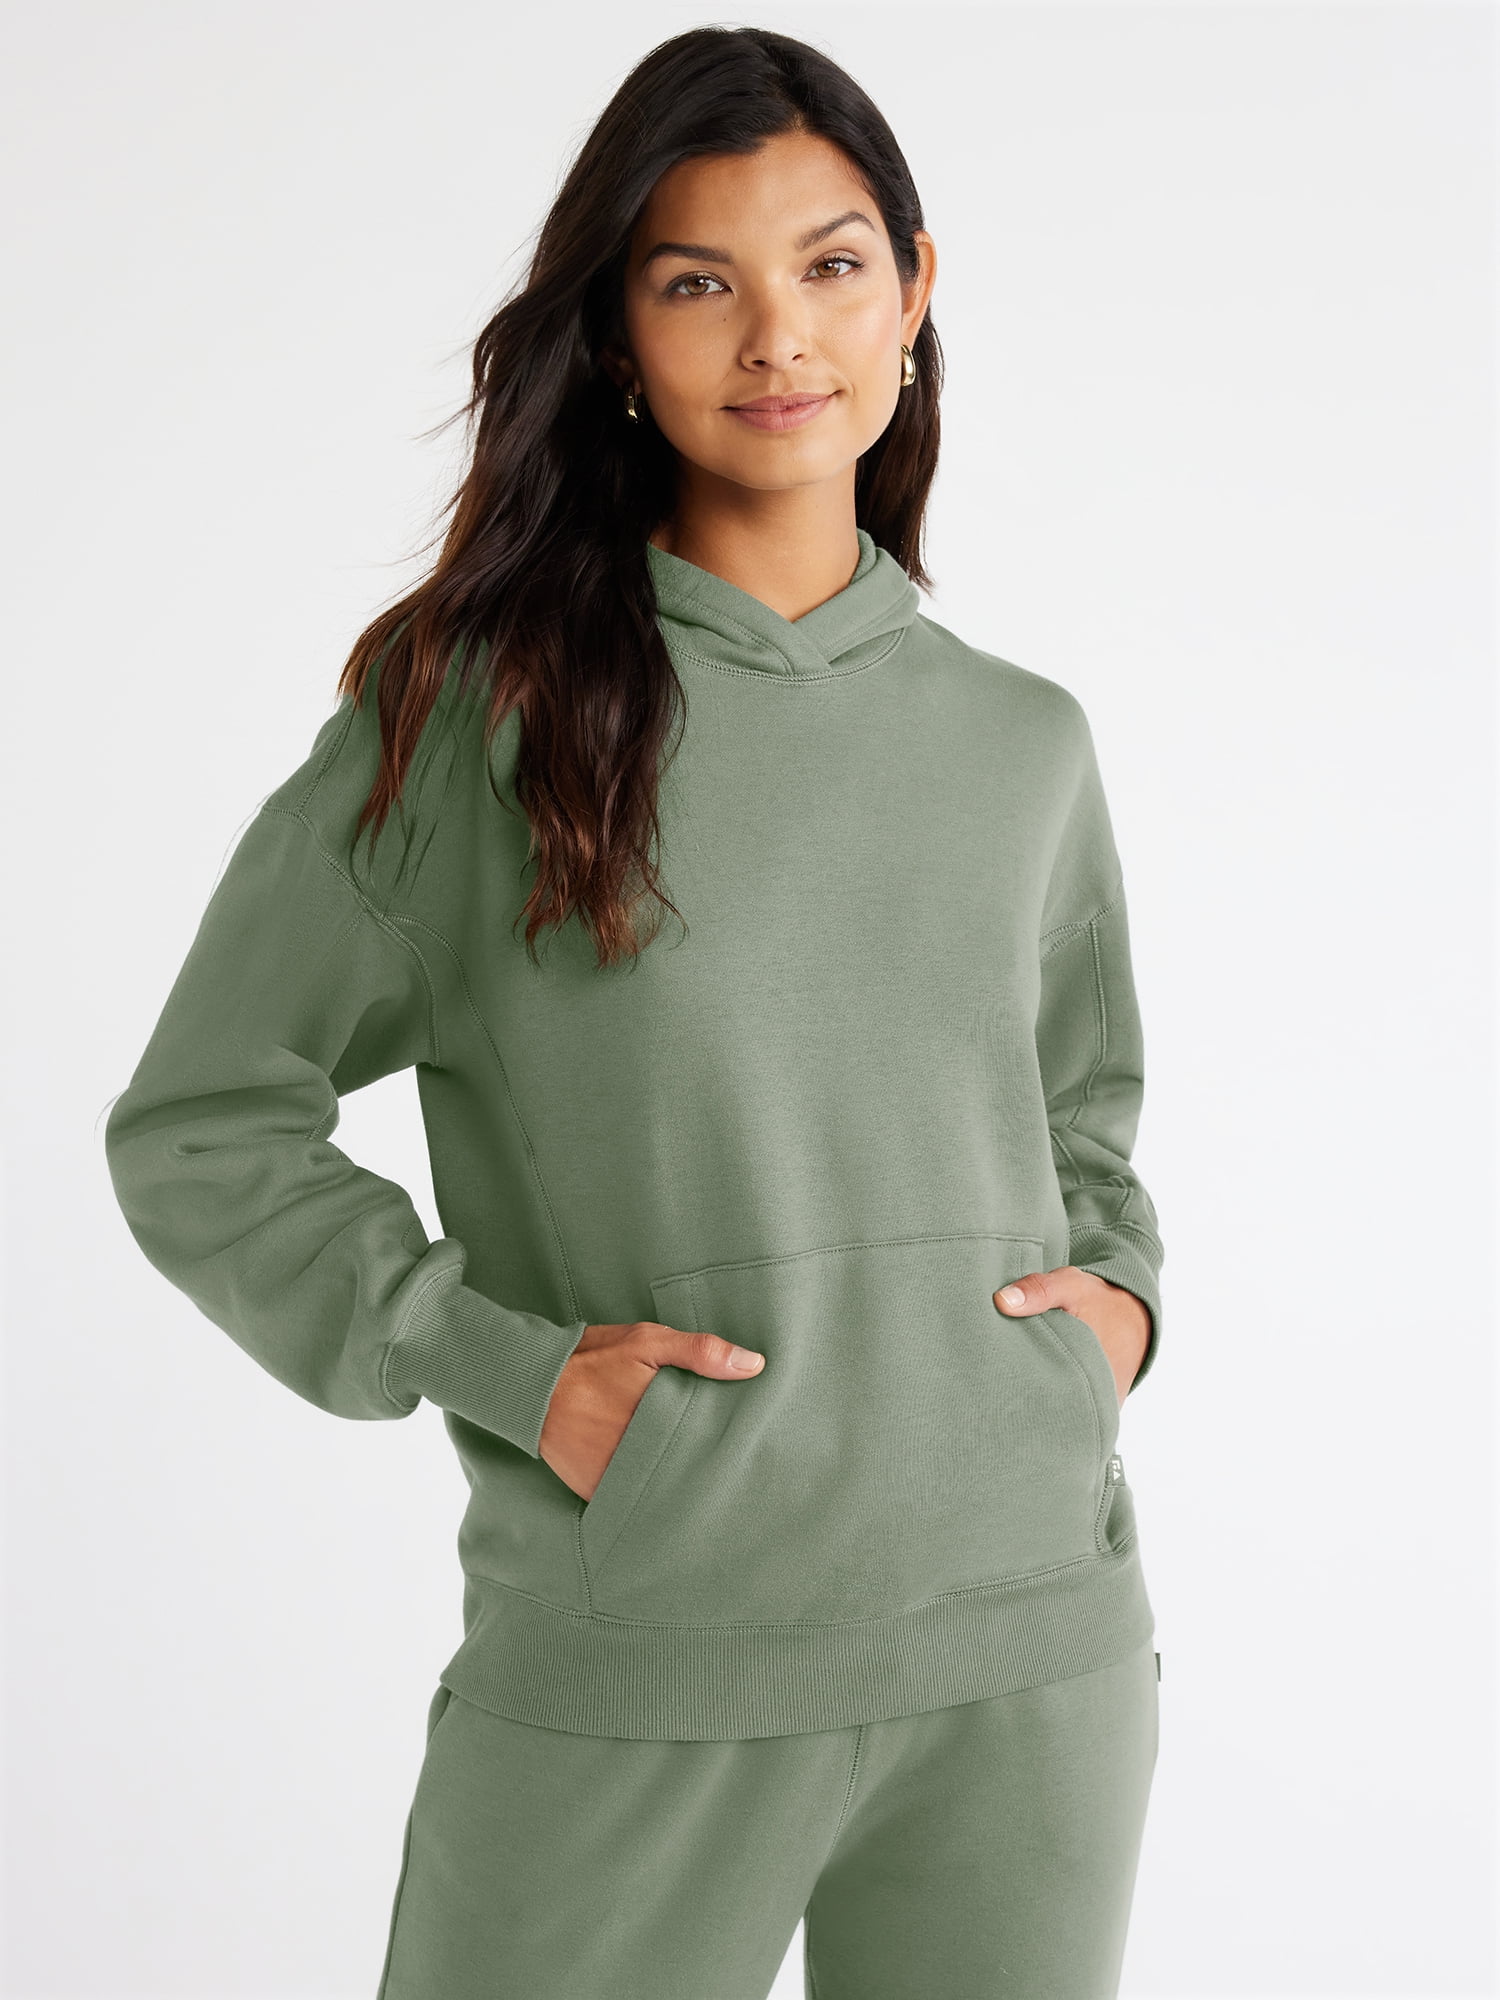 Free Assembly Women's Easy Sweatshirt Hoodie with Long Sleeves, Sizes ...